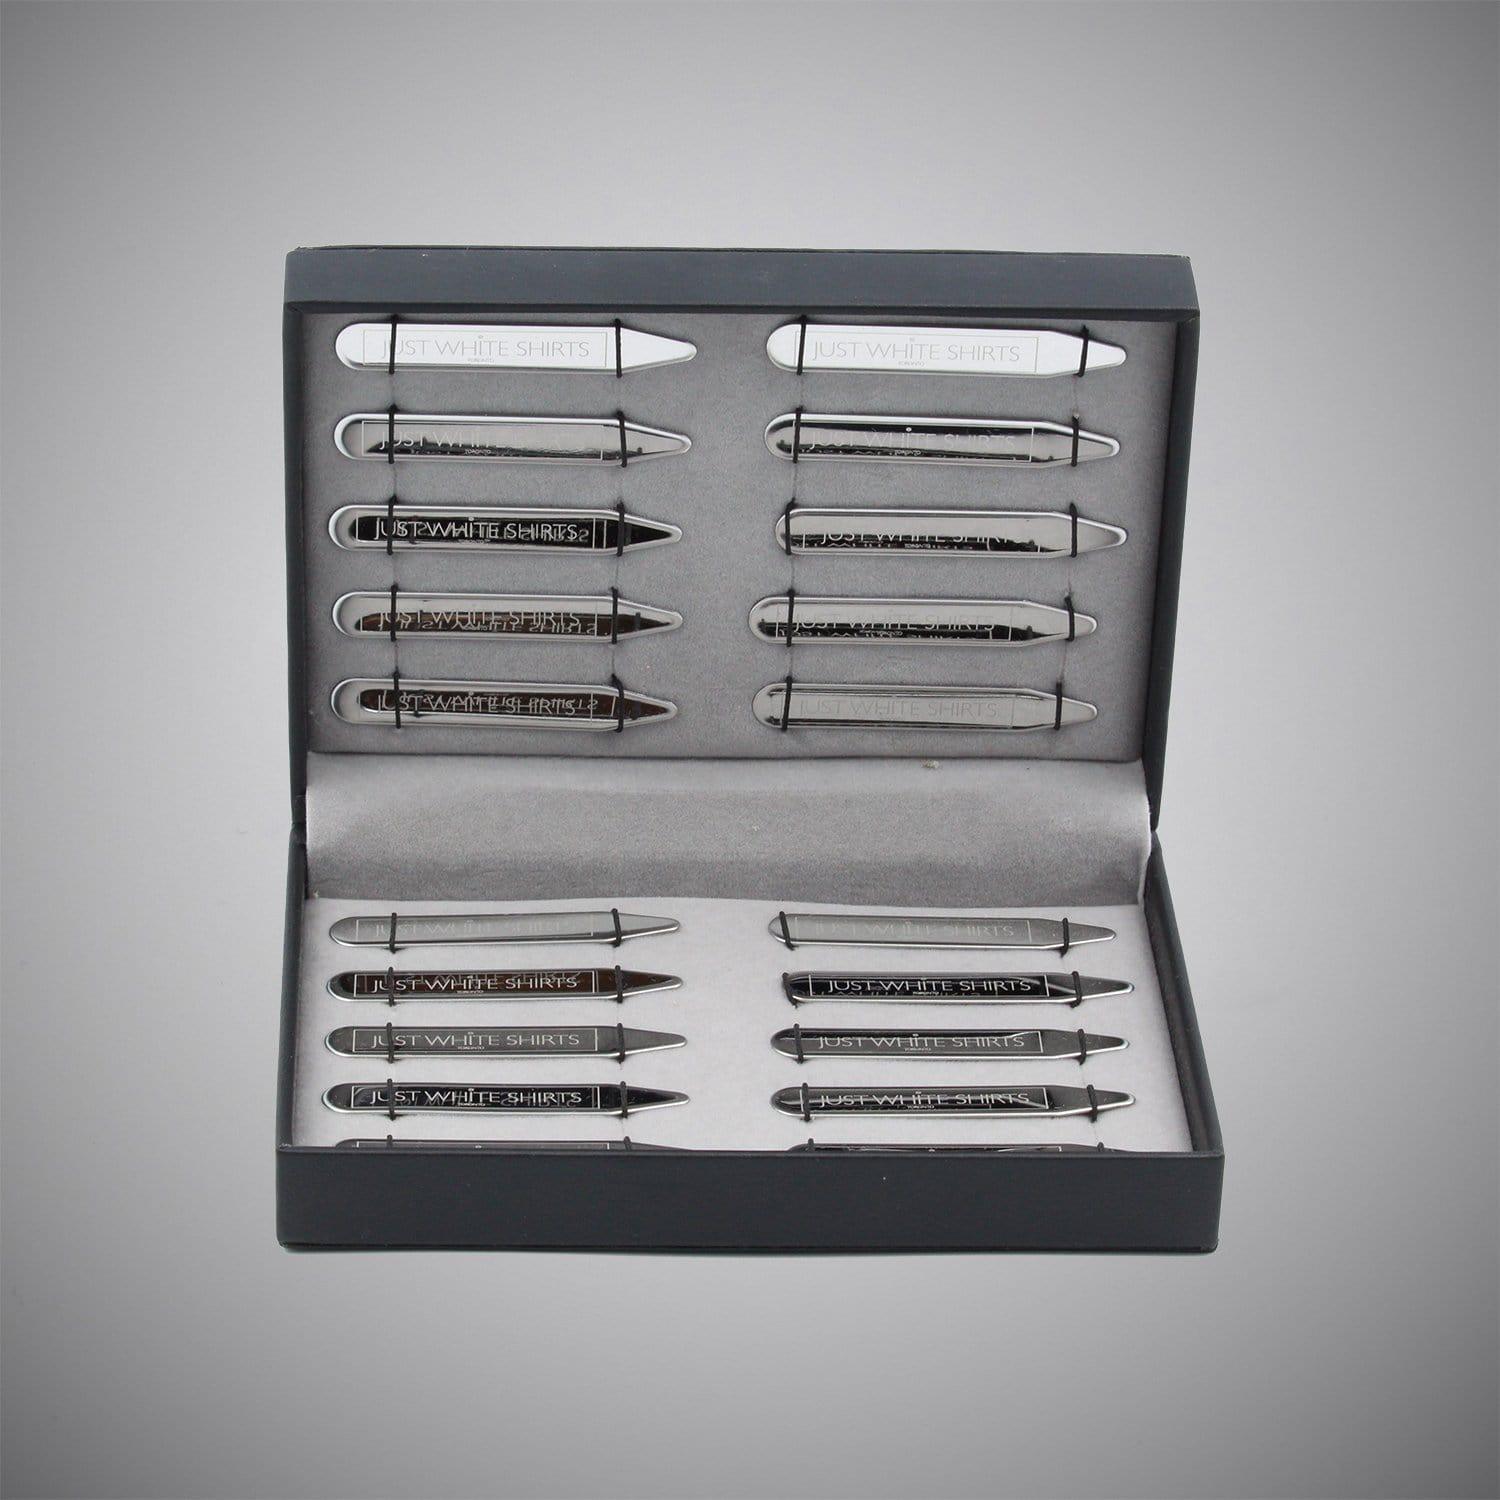 Silver Chrome Finish Stainless Steel 20 Piece Collar Stay Box Set - Just White Shirts